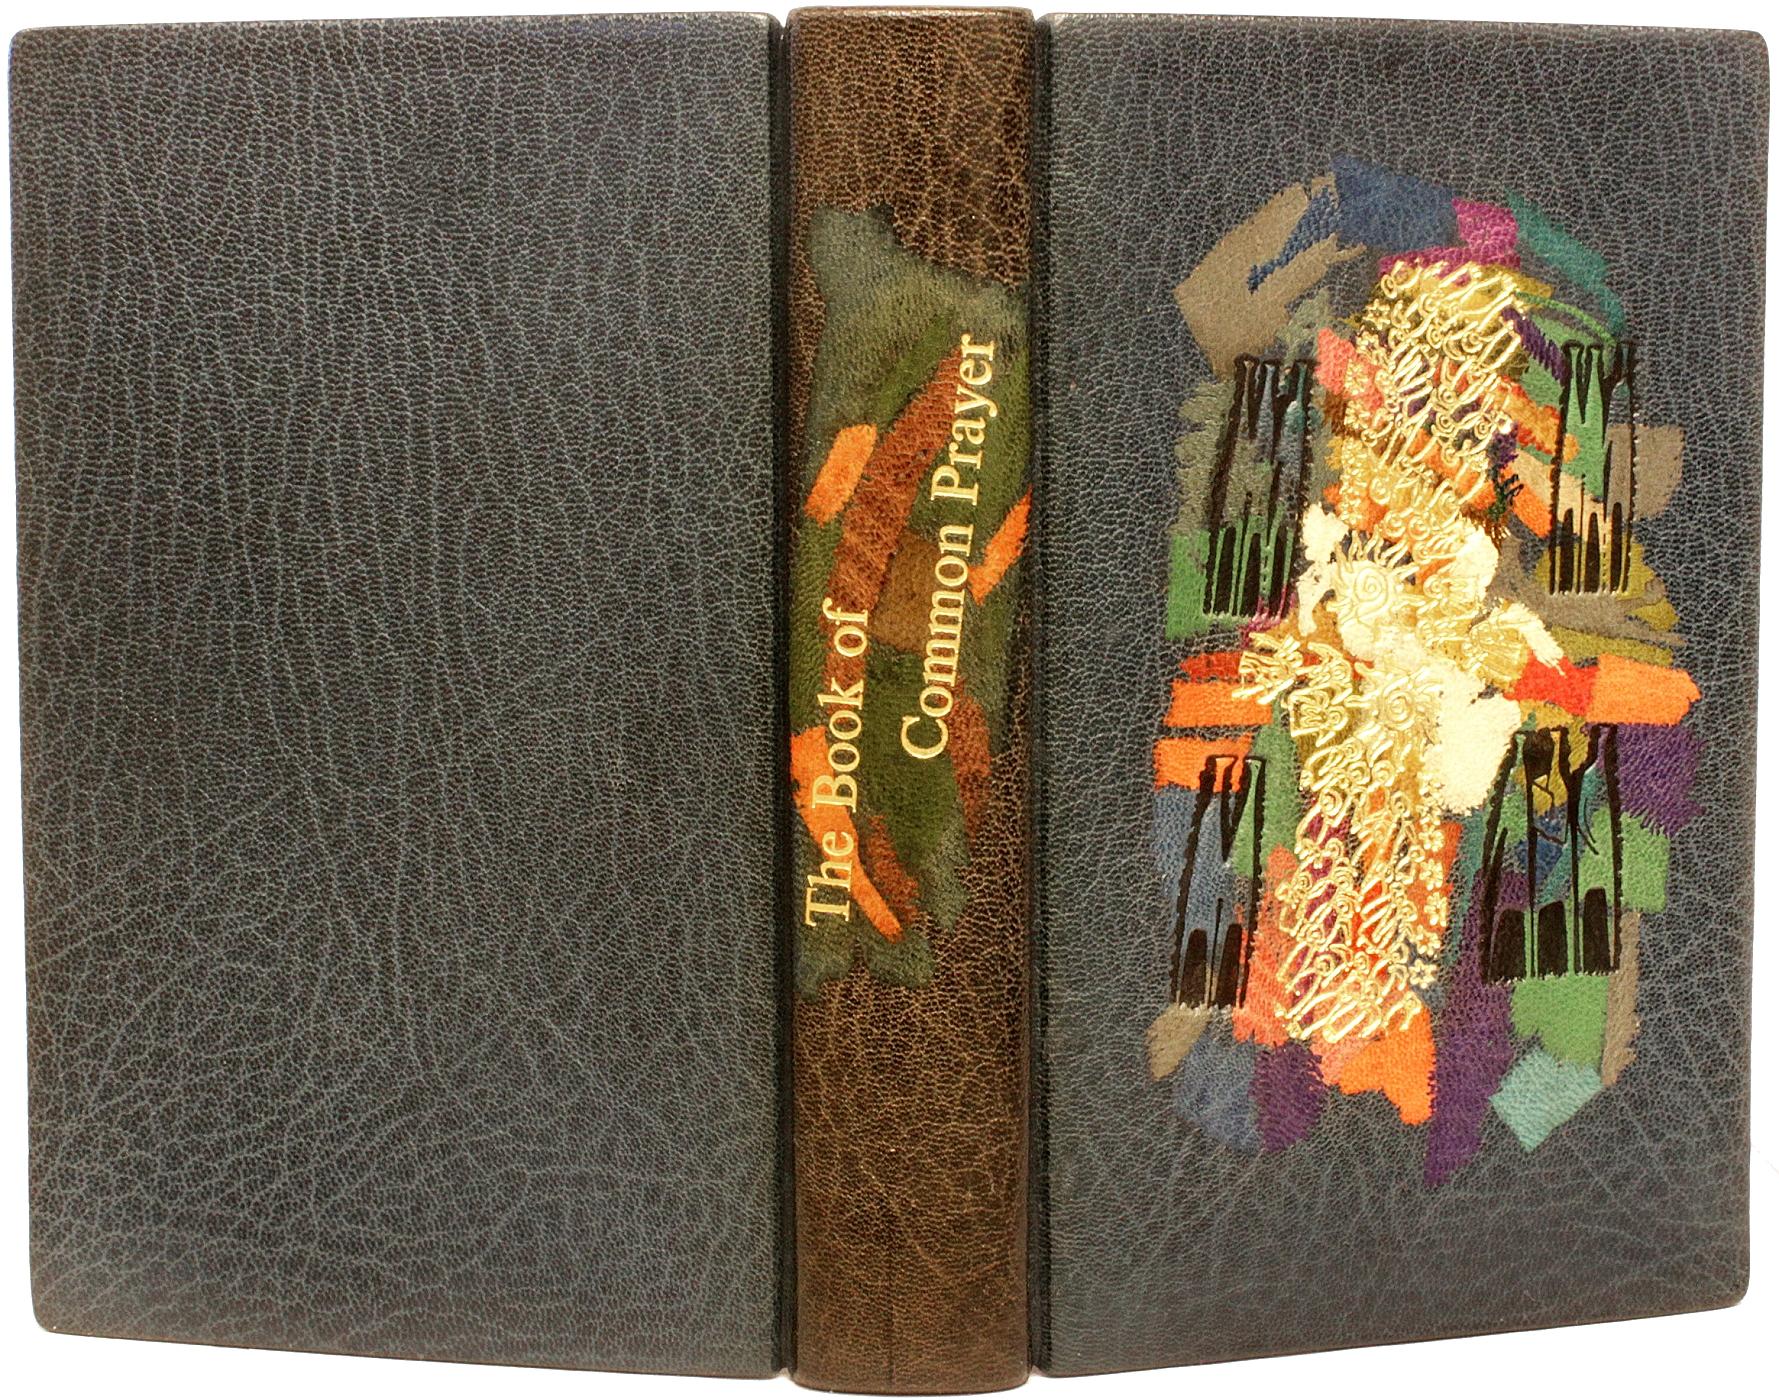 British The Book Of Common Prayer - 1960 - IN A SCARCE EARLY BINDING BY PHILIP SMITH ! For Sale